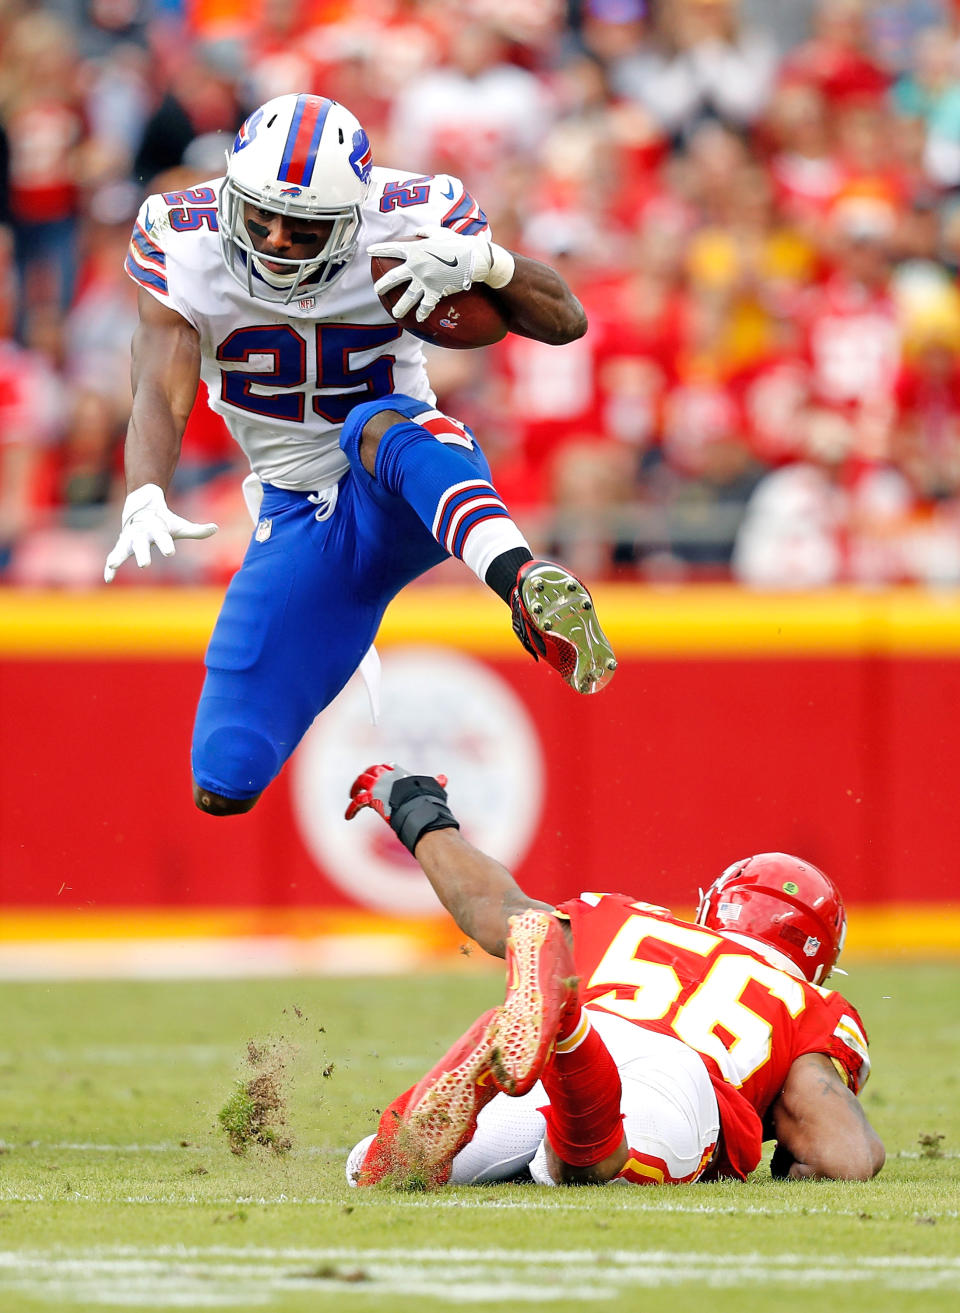 <p>Running back LeSean McCoy #25 of the Buffalo Bills leaps over inside linebacker Derrick Johnson #56 of the Kansas City Chiefs during the game at Arrowhead Stadium on November 26, 2017 in Kansas City, Missouri. (Photo by Jamie Squire/Getty Images) </p>